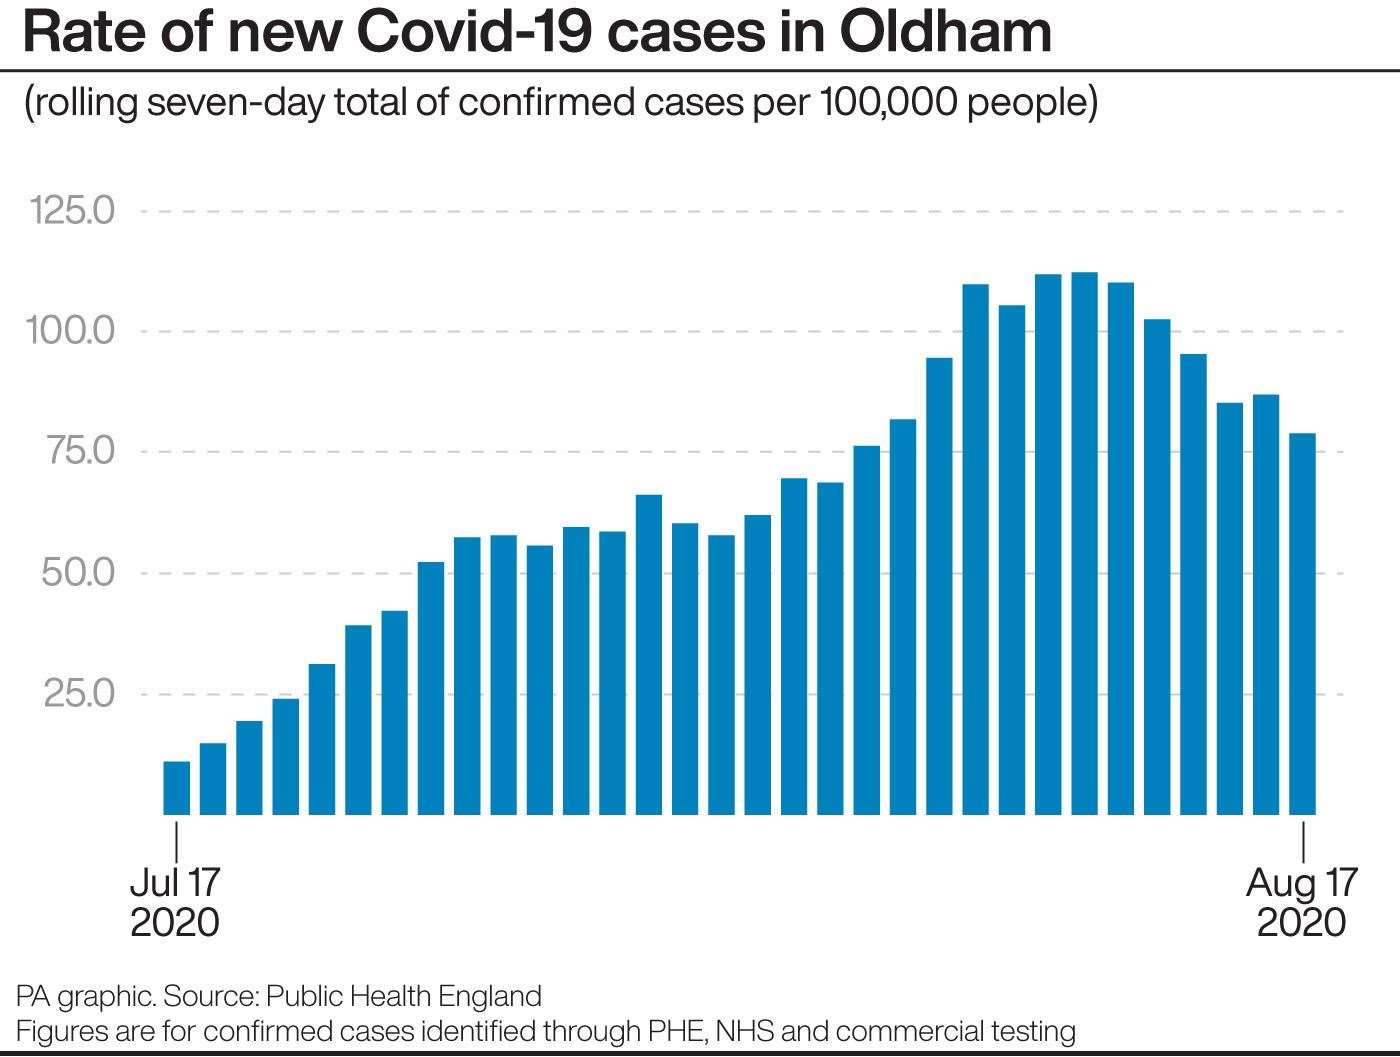 Rate of new Civid-19 cases in Oldham (PA Graphics)